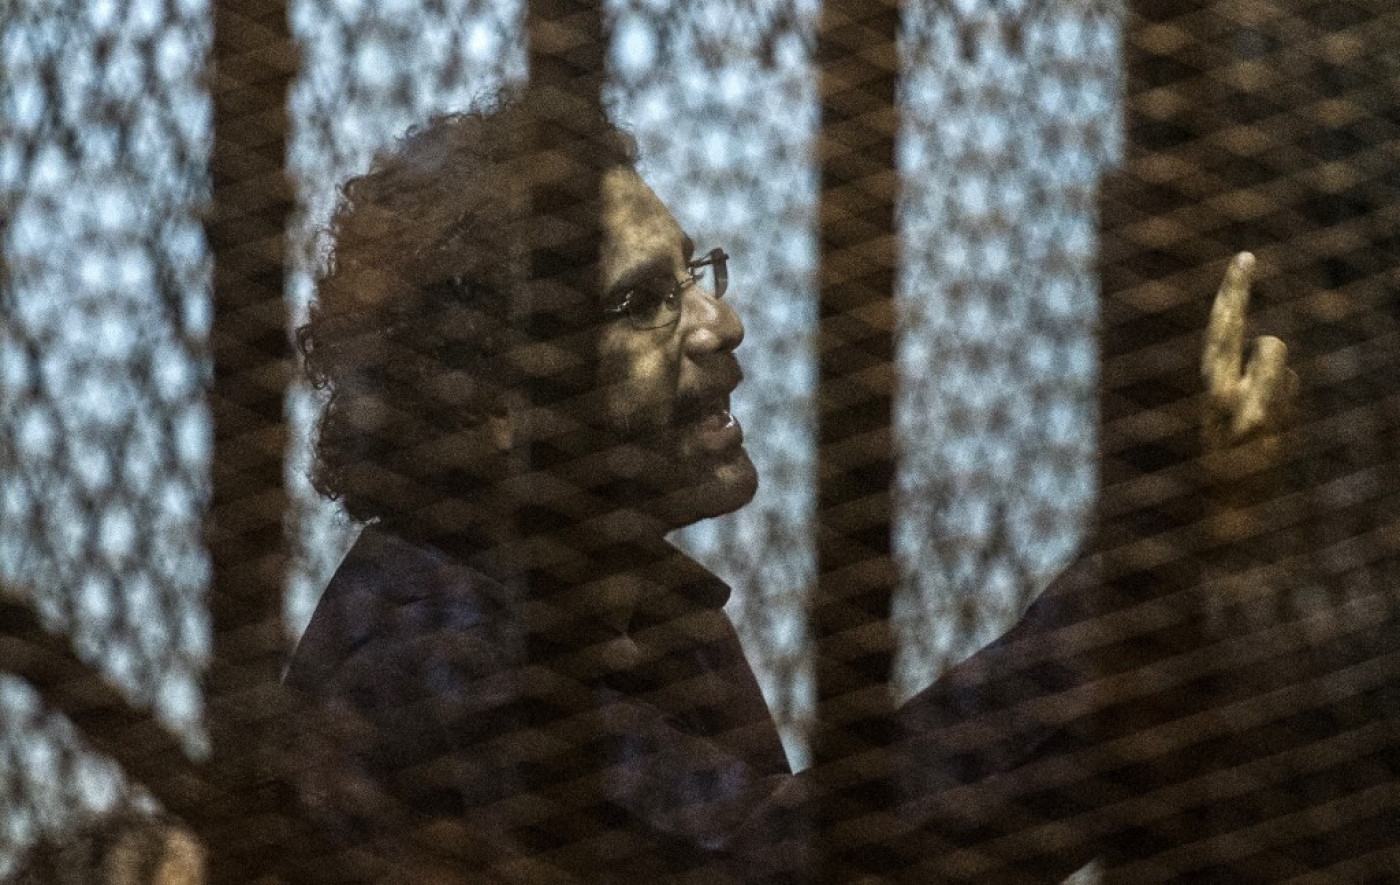 Egyptian activist Alaa Abd El-Fattah gestures from the defendant’s cage during his trial in Cairo in May 2015 (AFP)